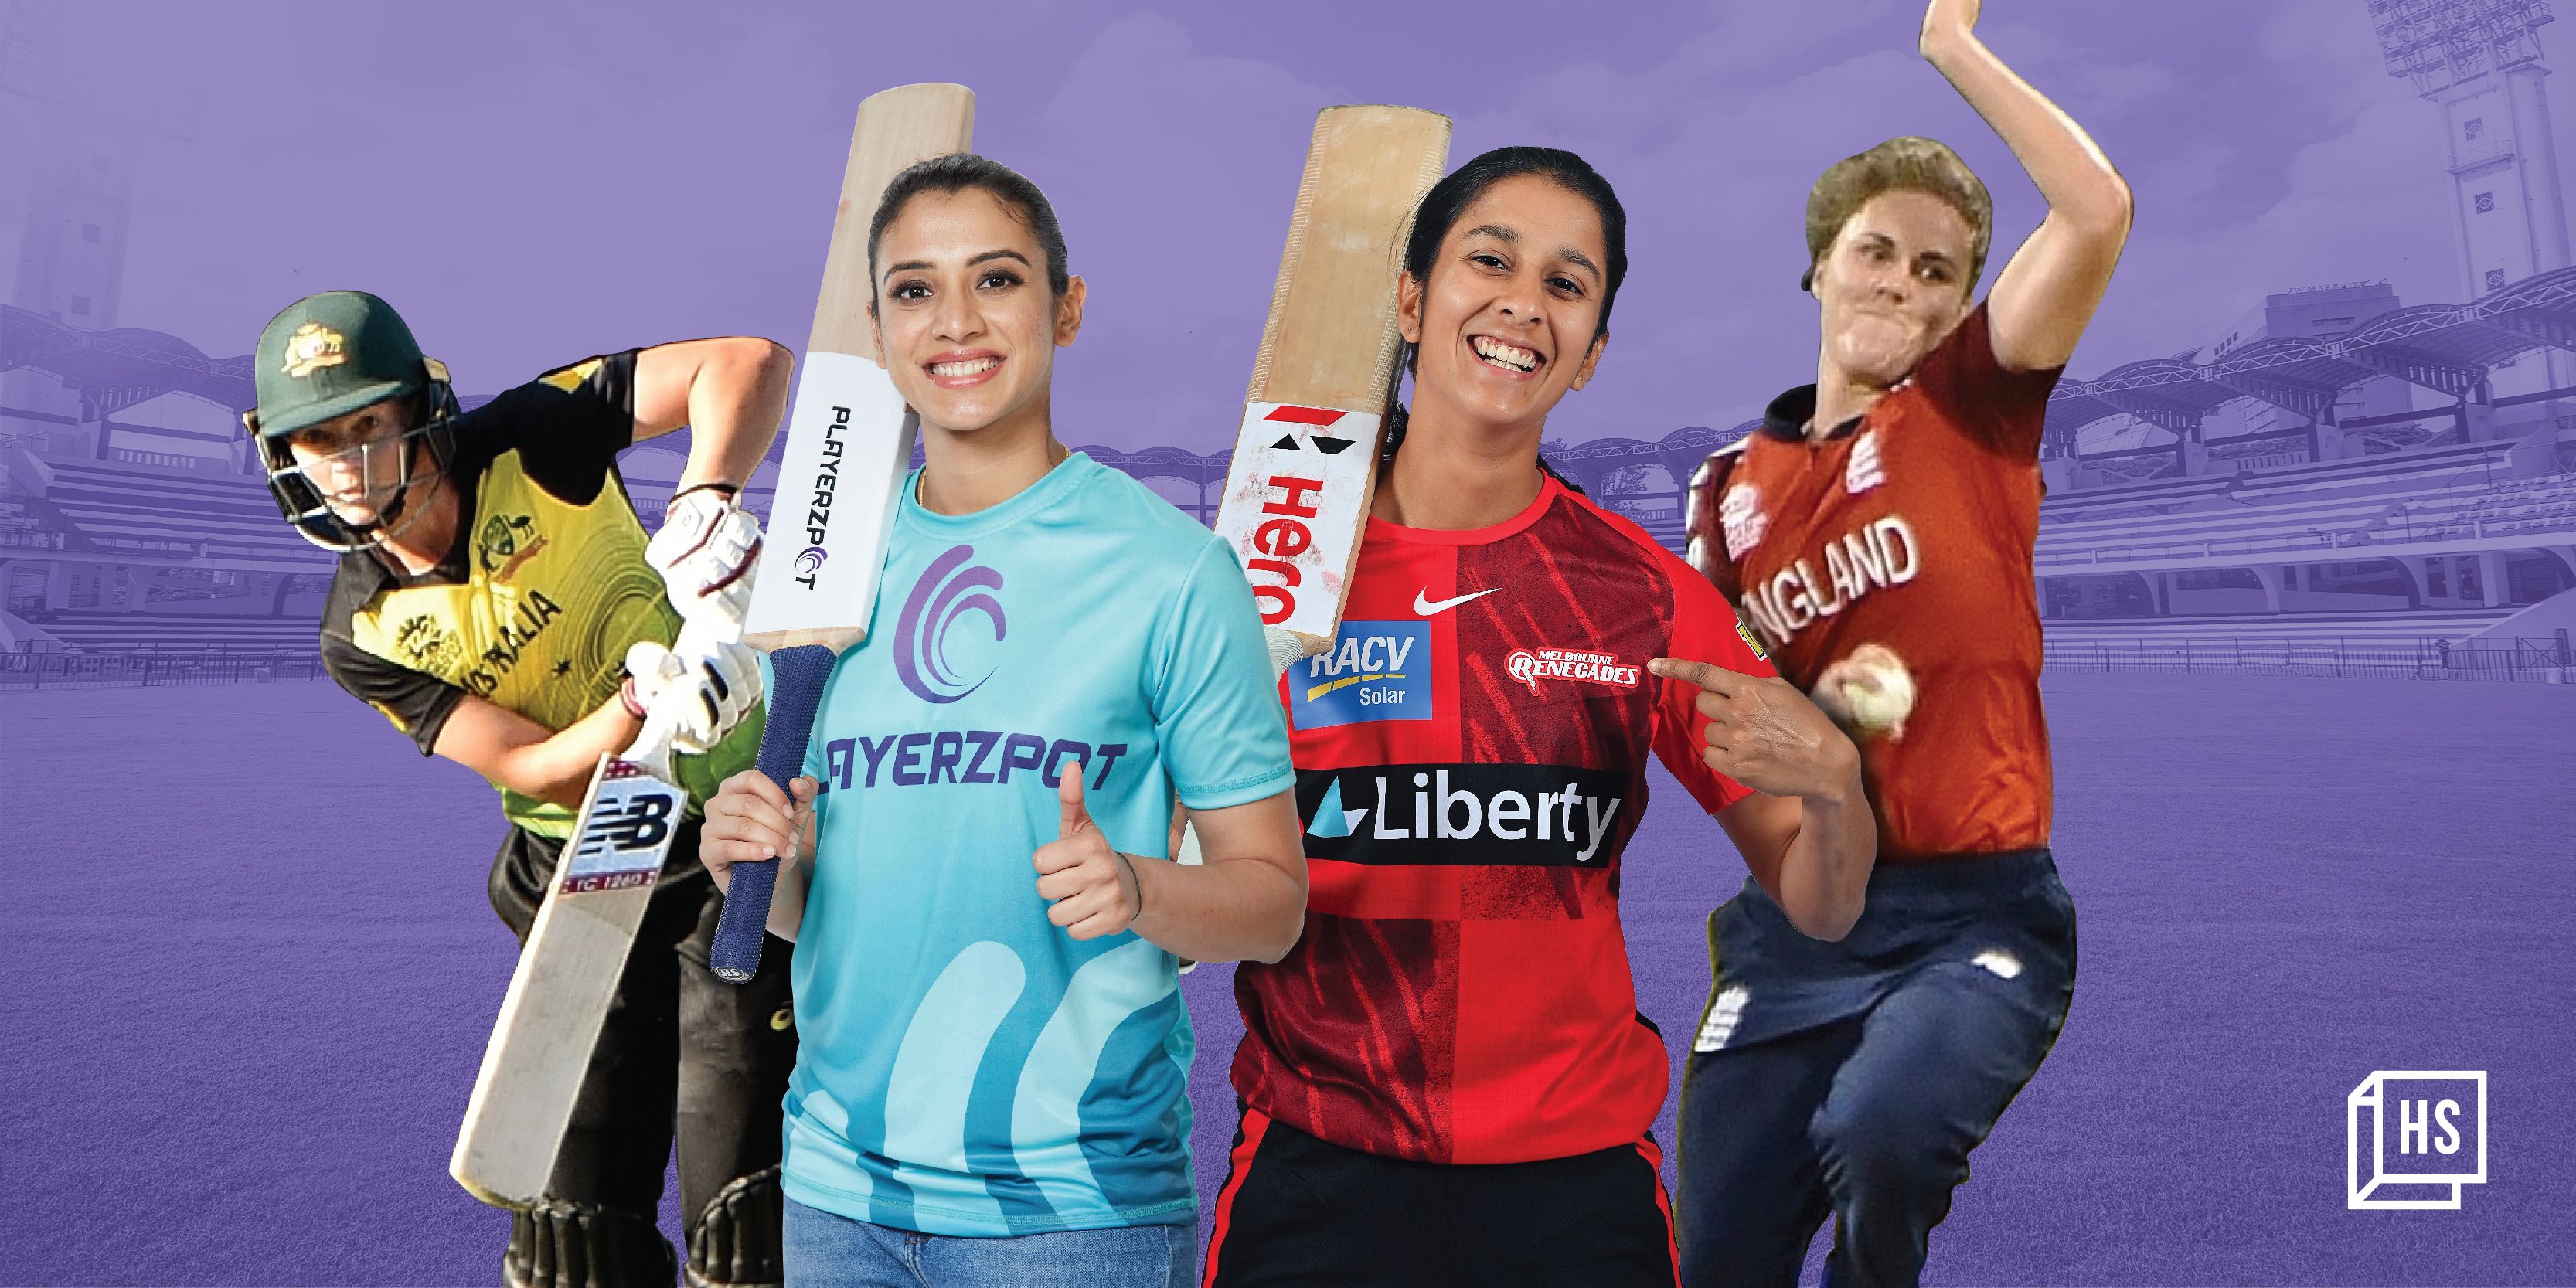 WPL may be the game-changer women’s cricket has been waiting for

